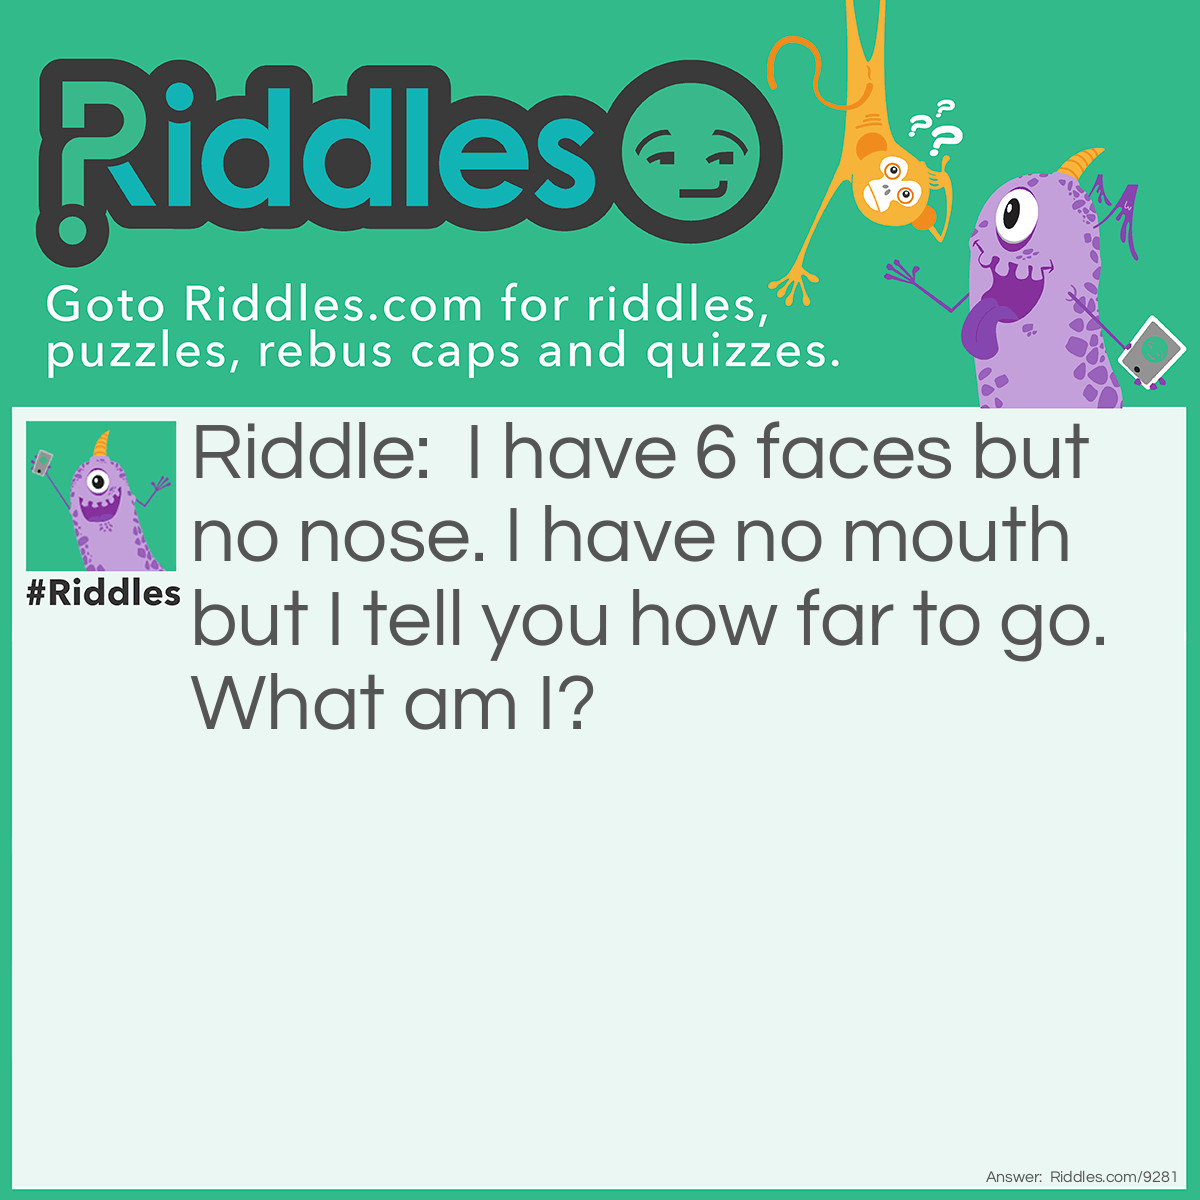 Riddle: I have 6 faces but no nose. I have no mouth but I tell you how far to go. What am I? Answer: A die (Dice)